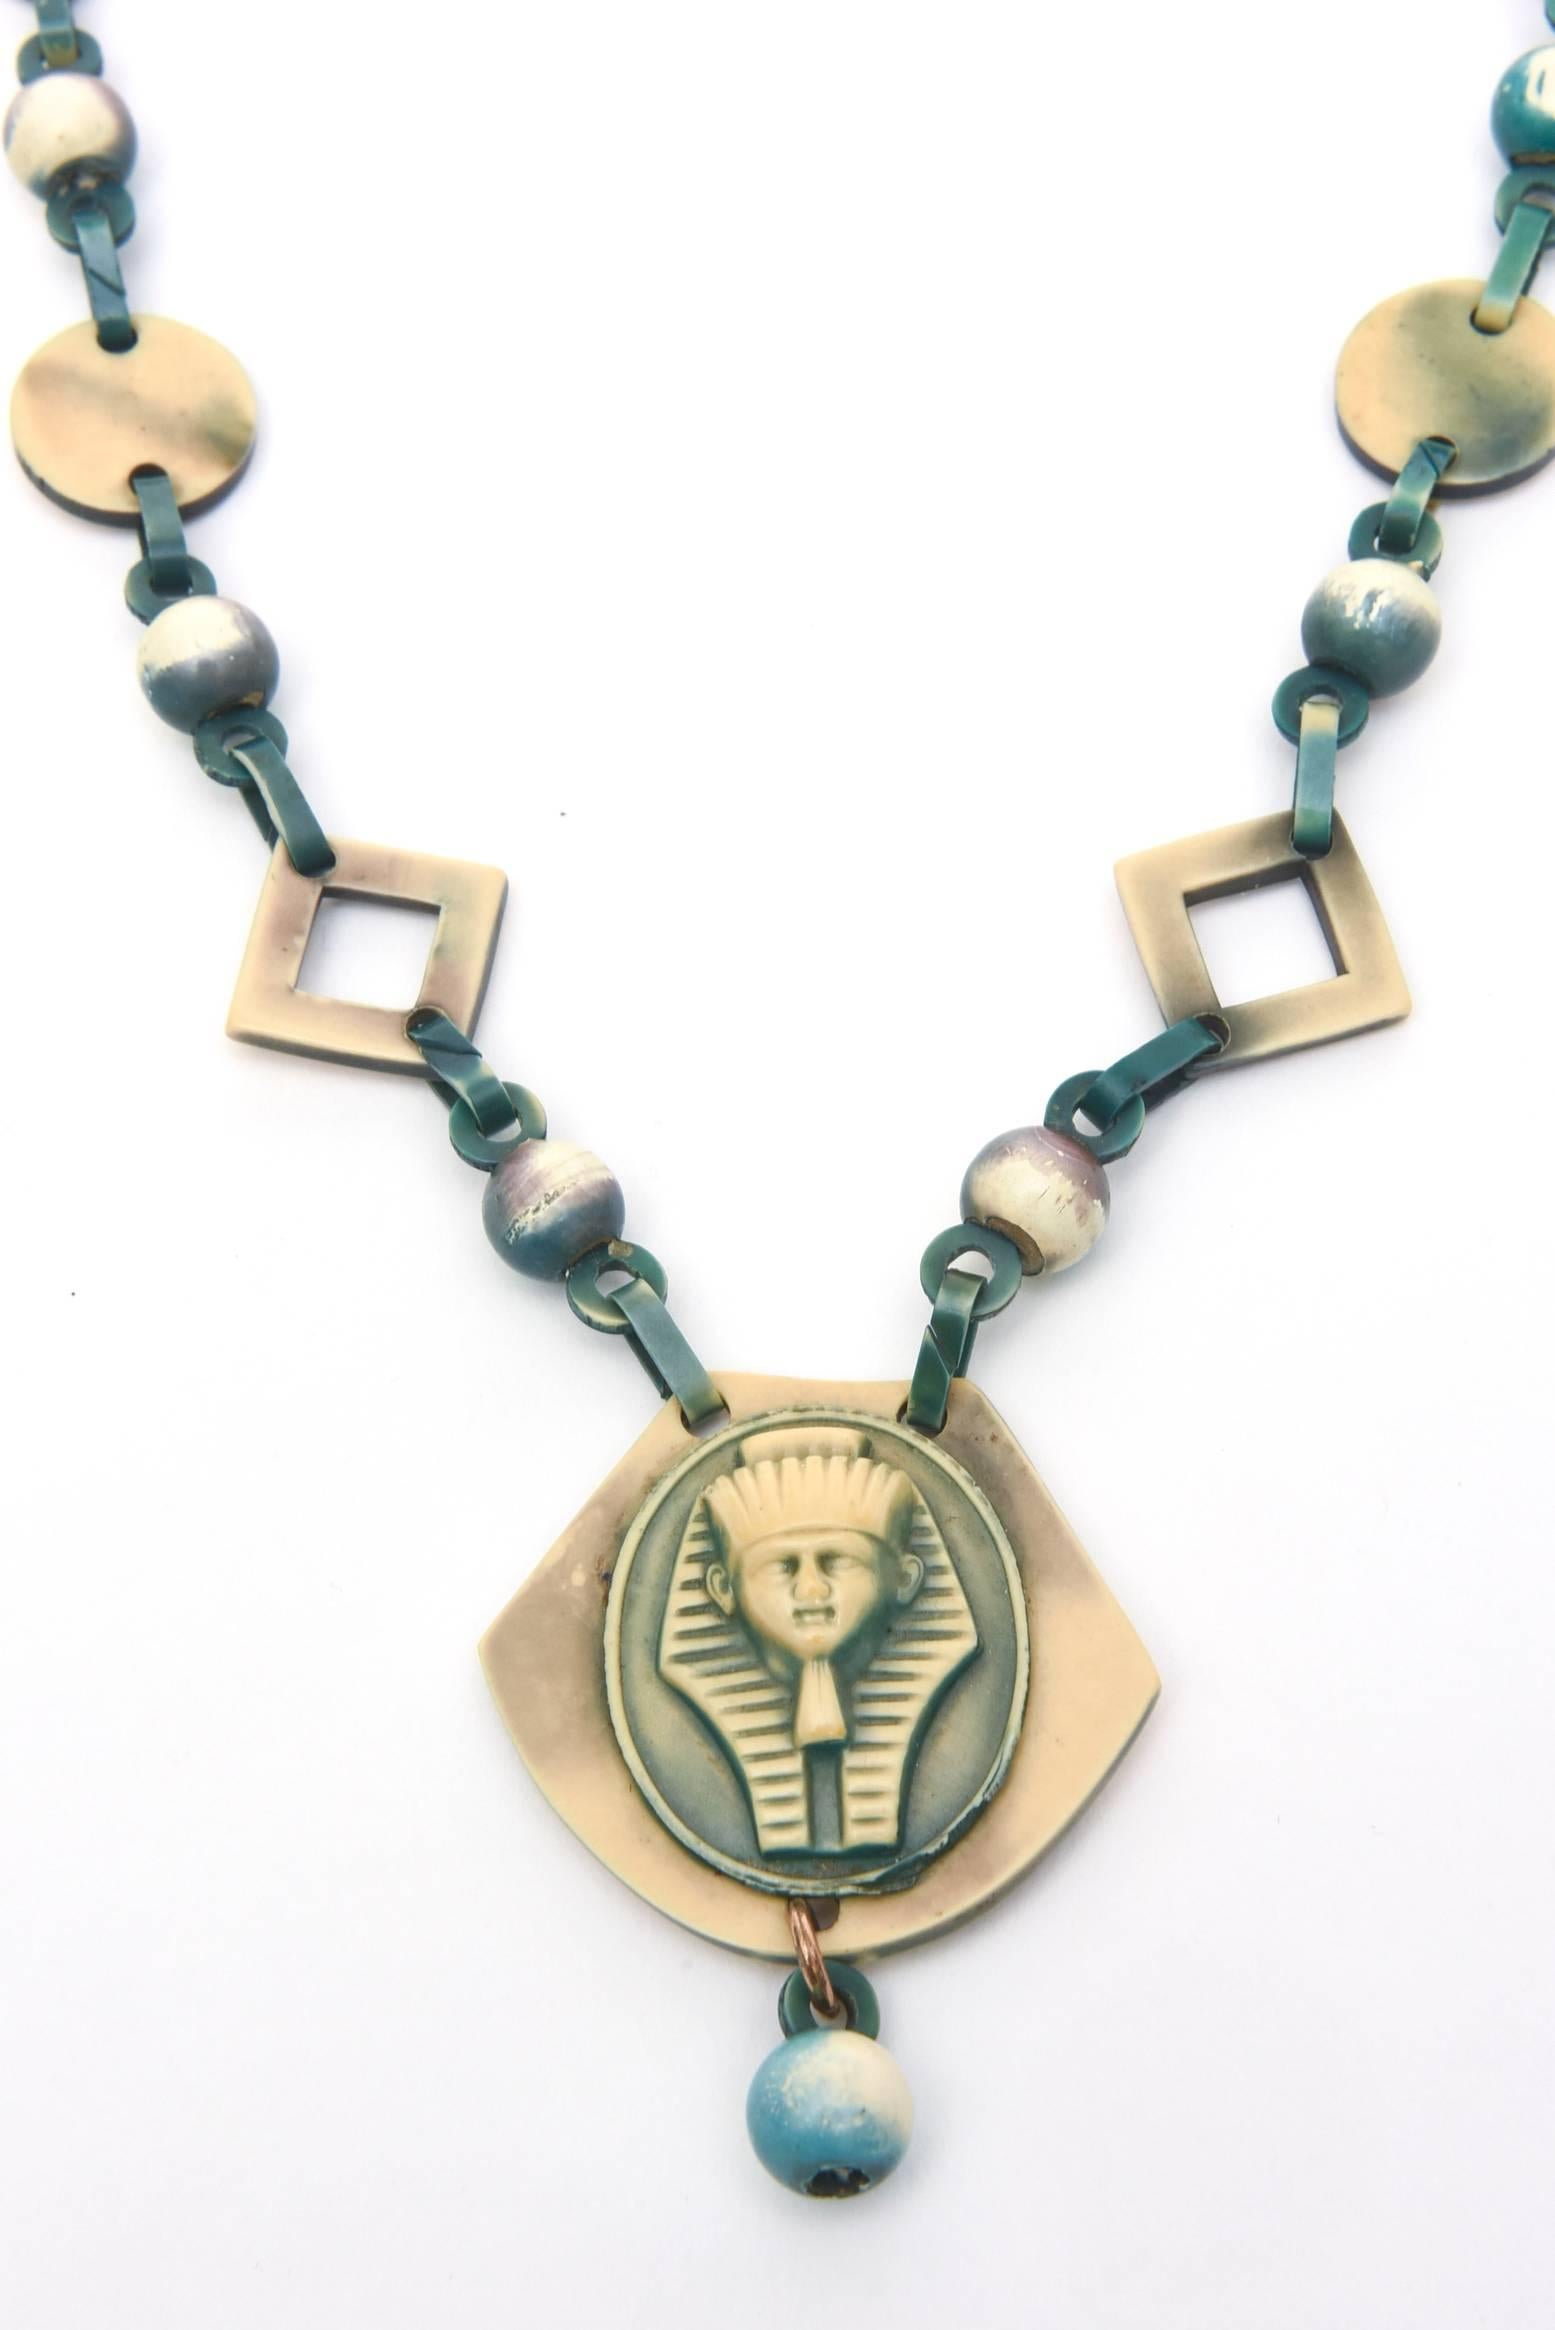 This interesting and long vintage necklace with beautiful colors of celluloid is like bakelite. It has an Egyptian Revival influence with an art deco feel and period yet it is modern looking.  Celluloid was from the same time period. it is a